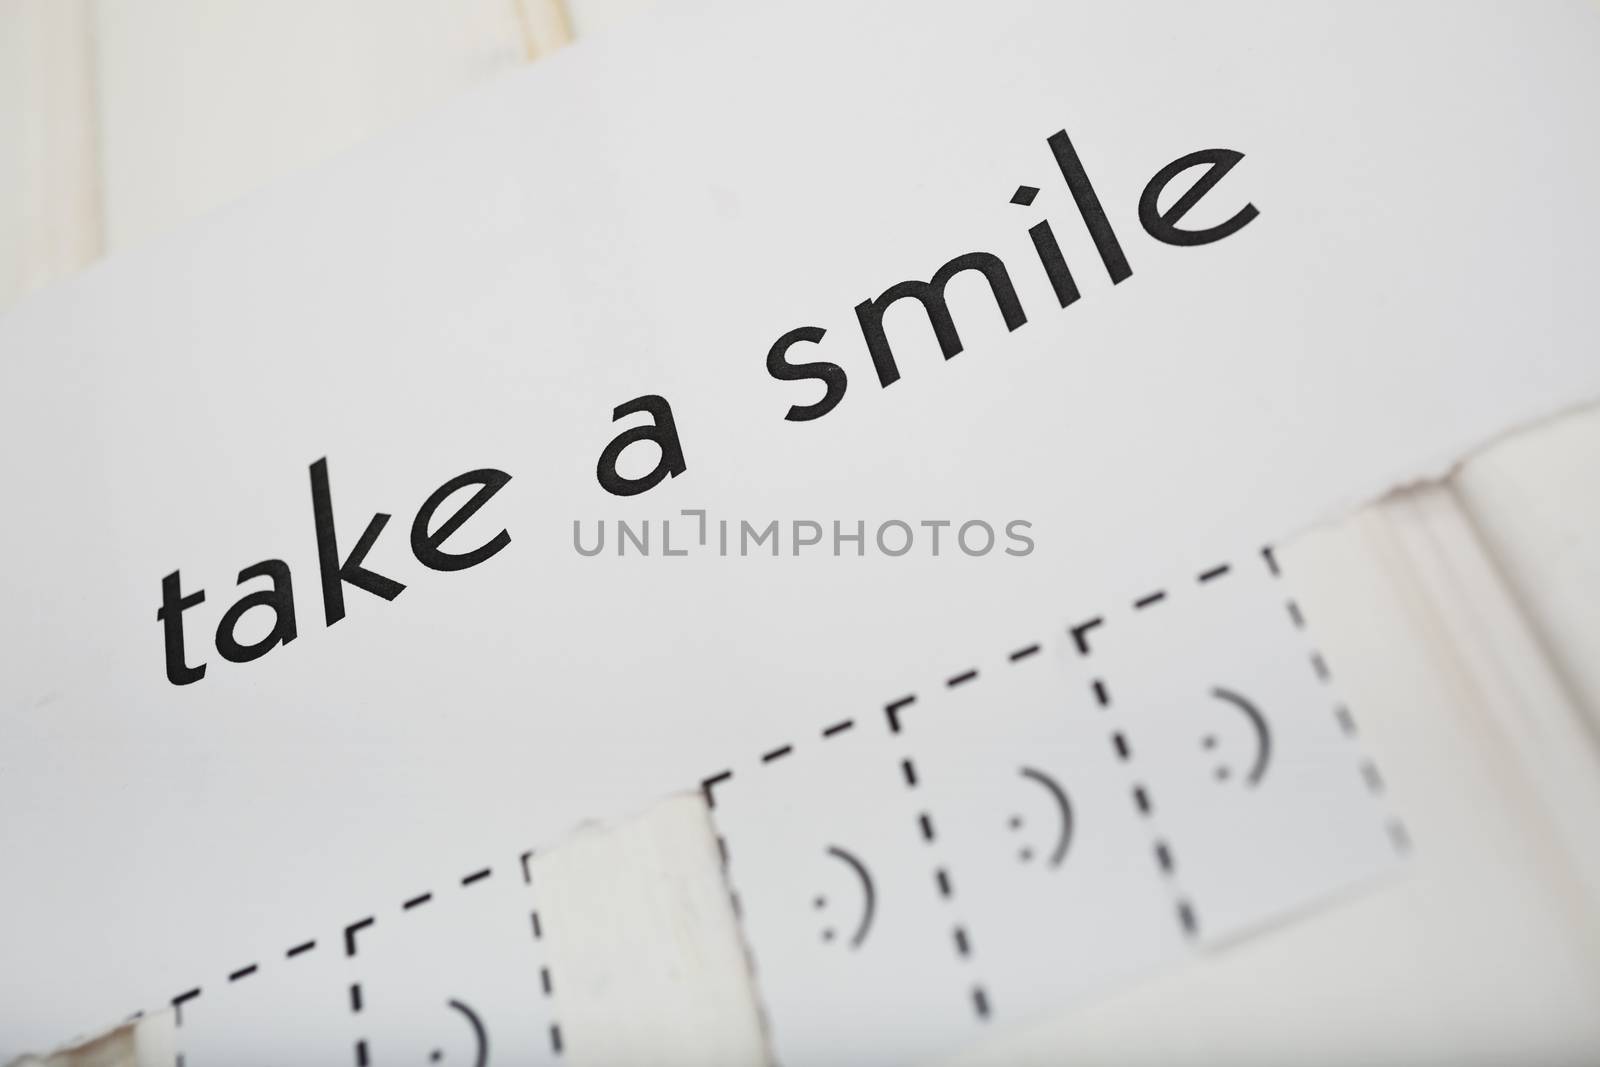 A paper with the phrase: Take a Smile and with a smile sign ready to be tore off. DOF. The focus is on the phrase.